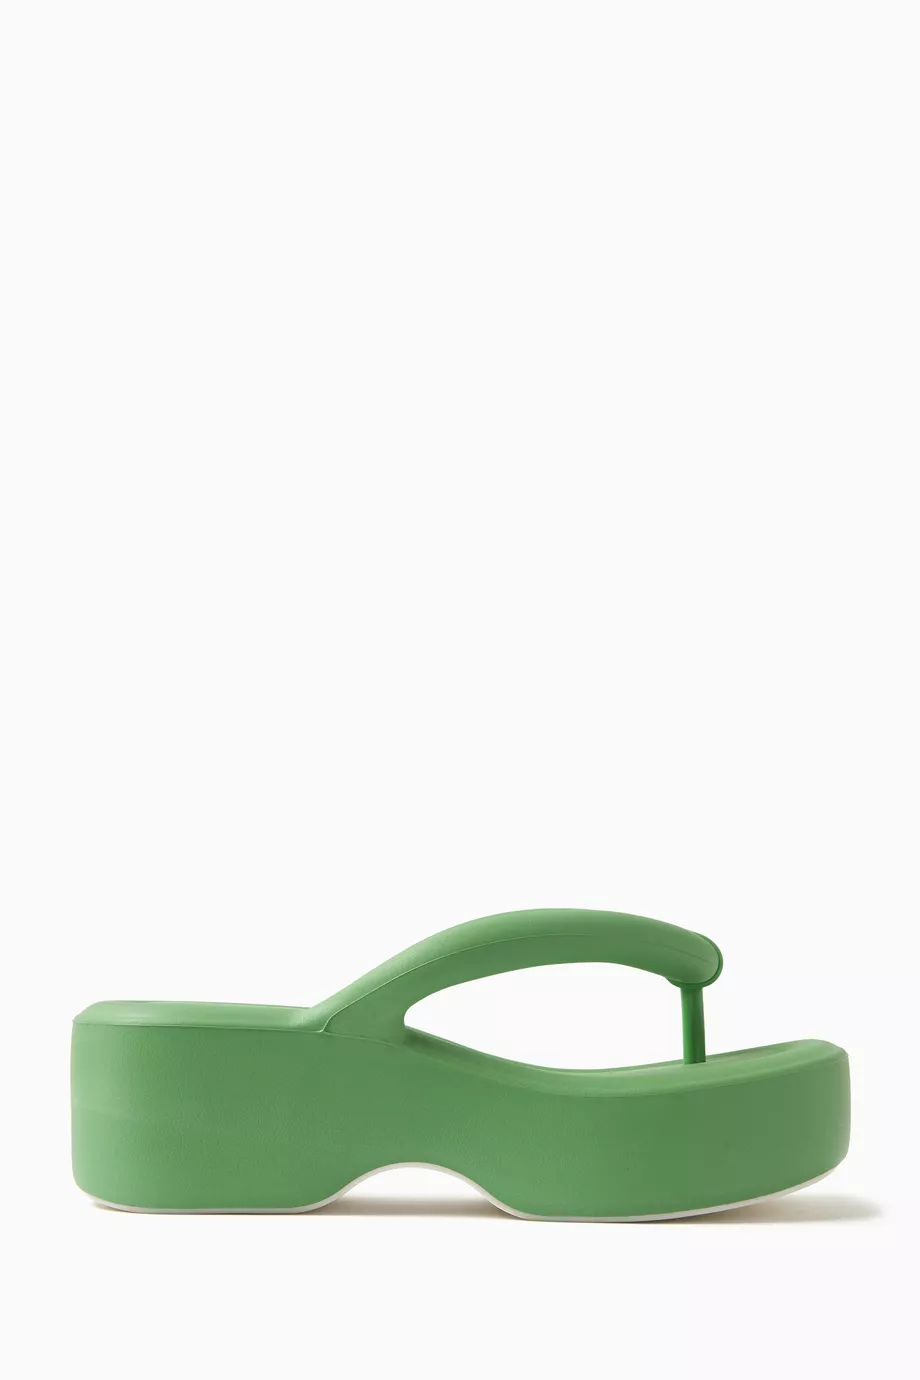 Melissa Free Rubber Bag in Green